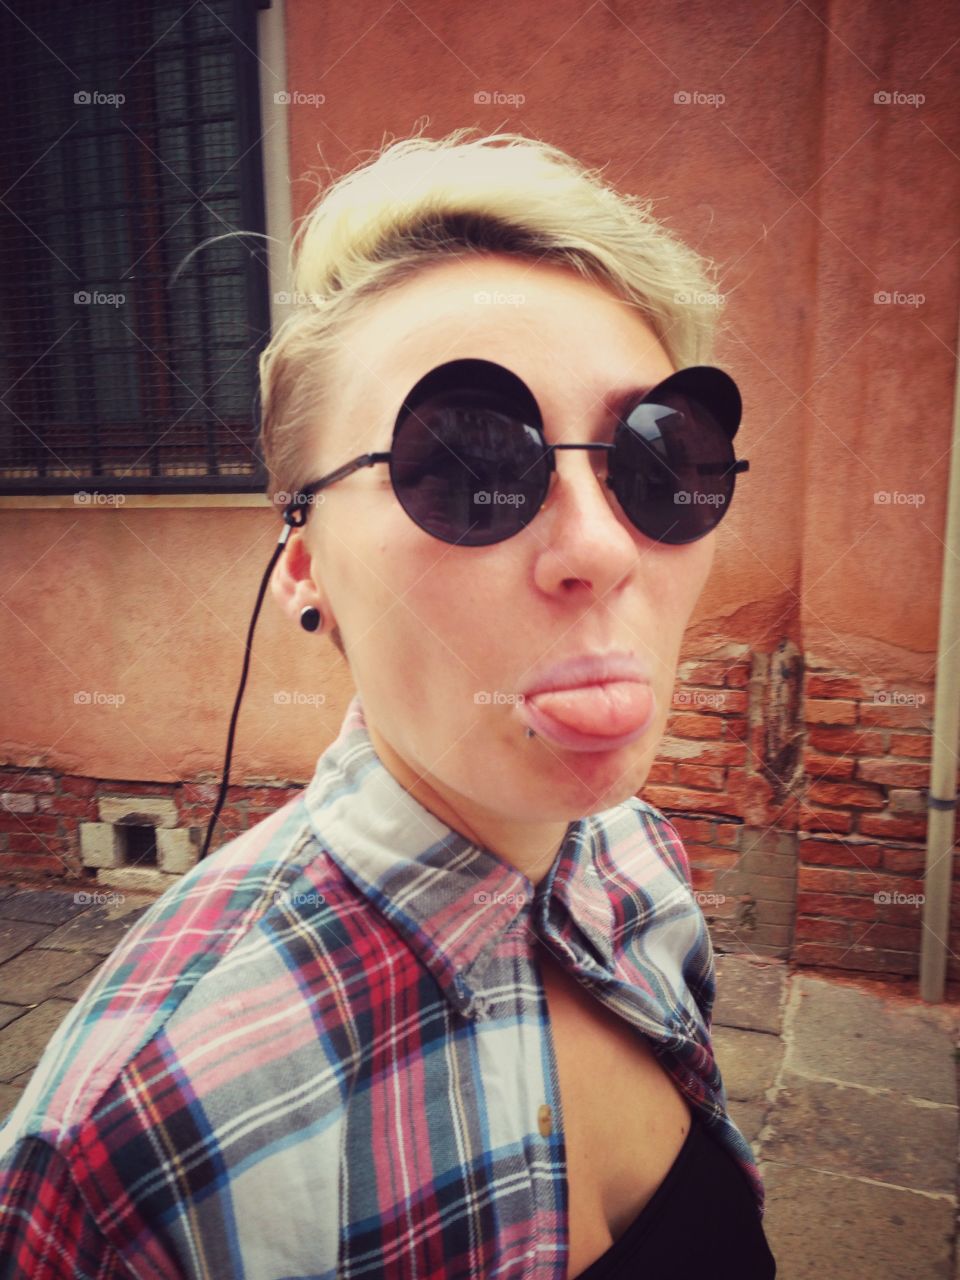 Young woman showing her tongue)